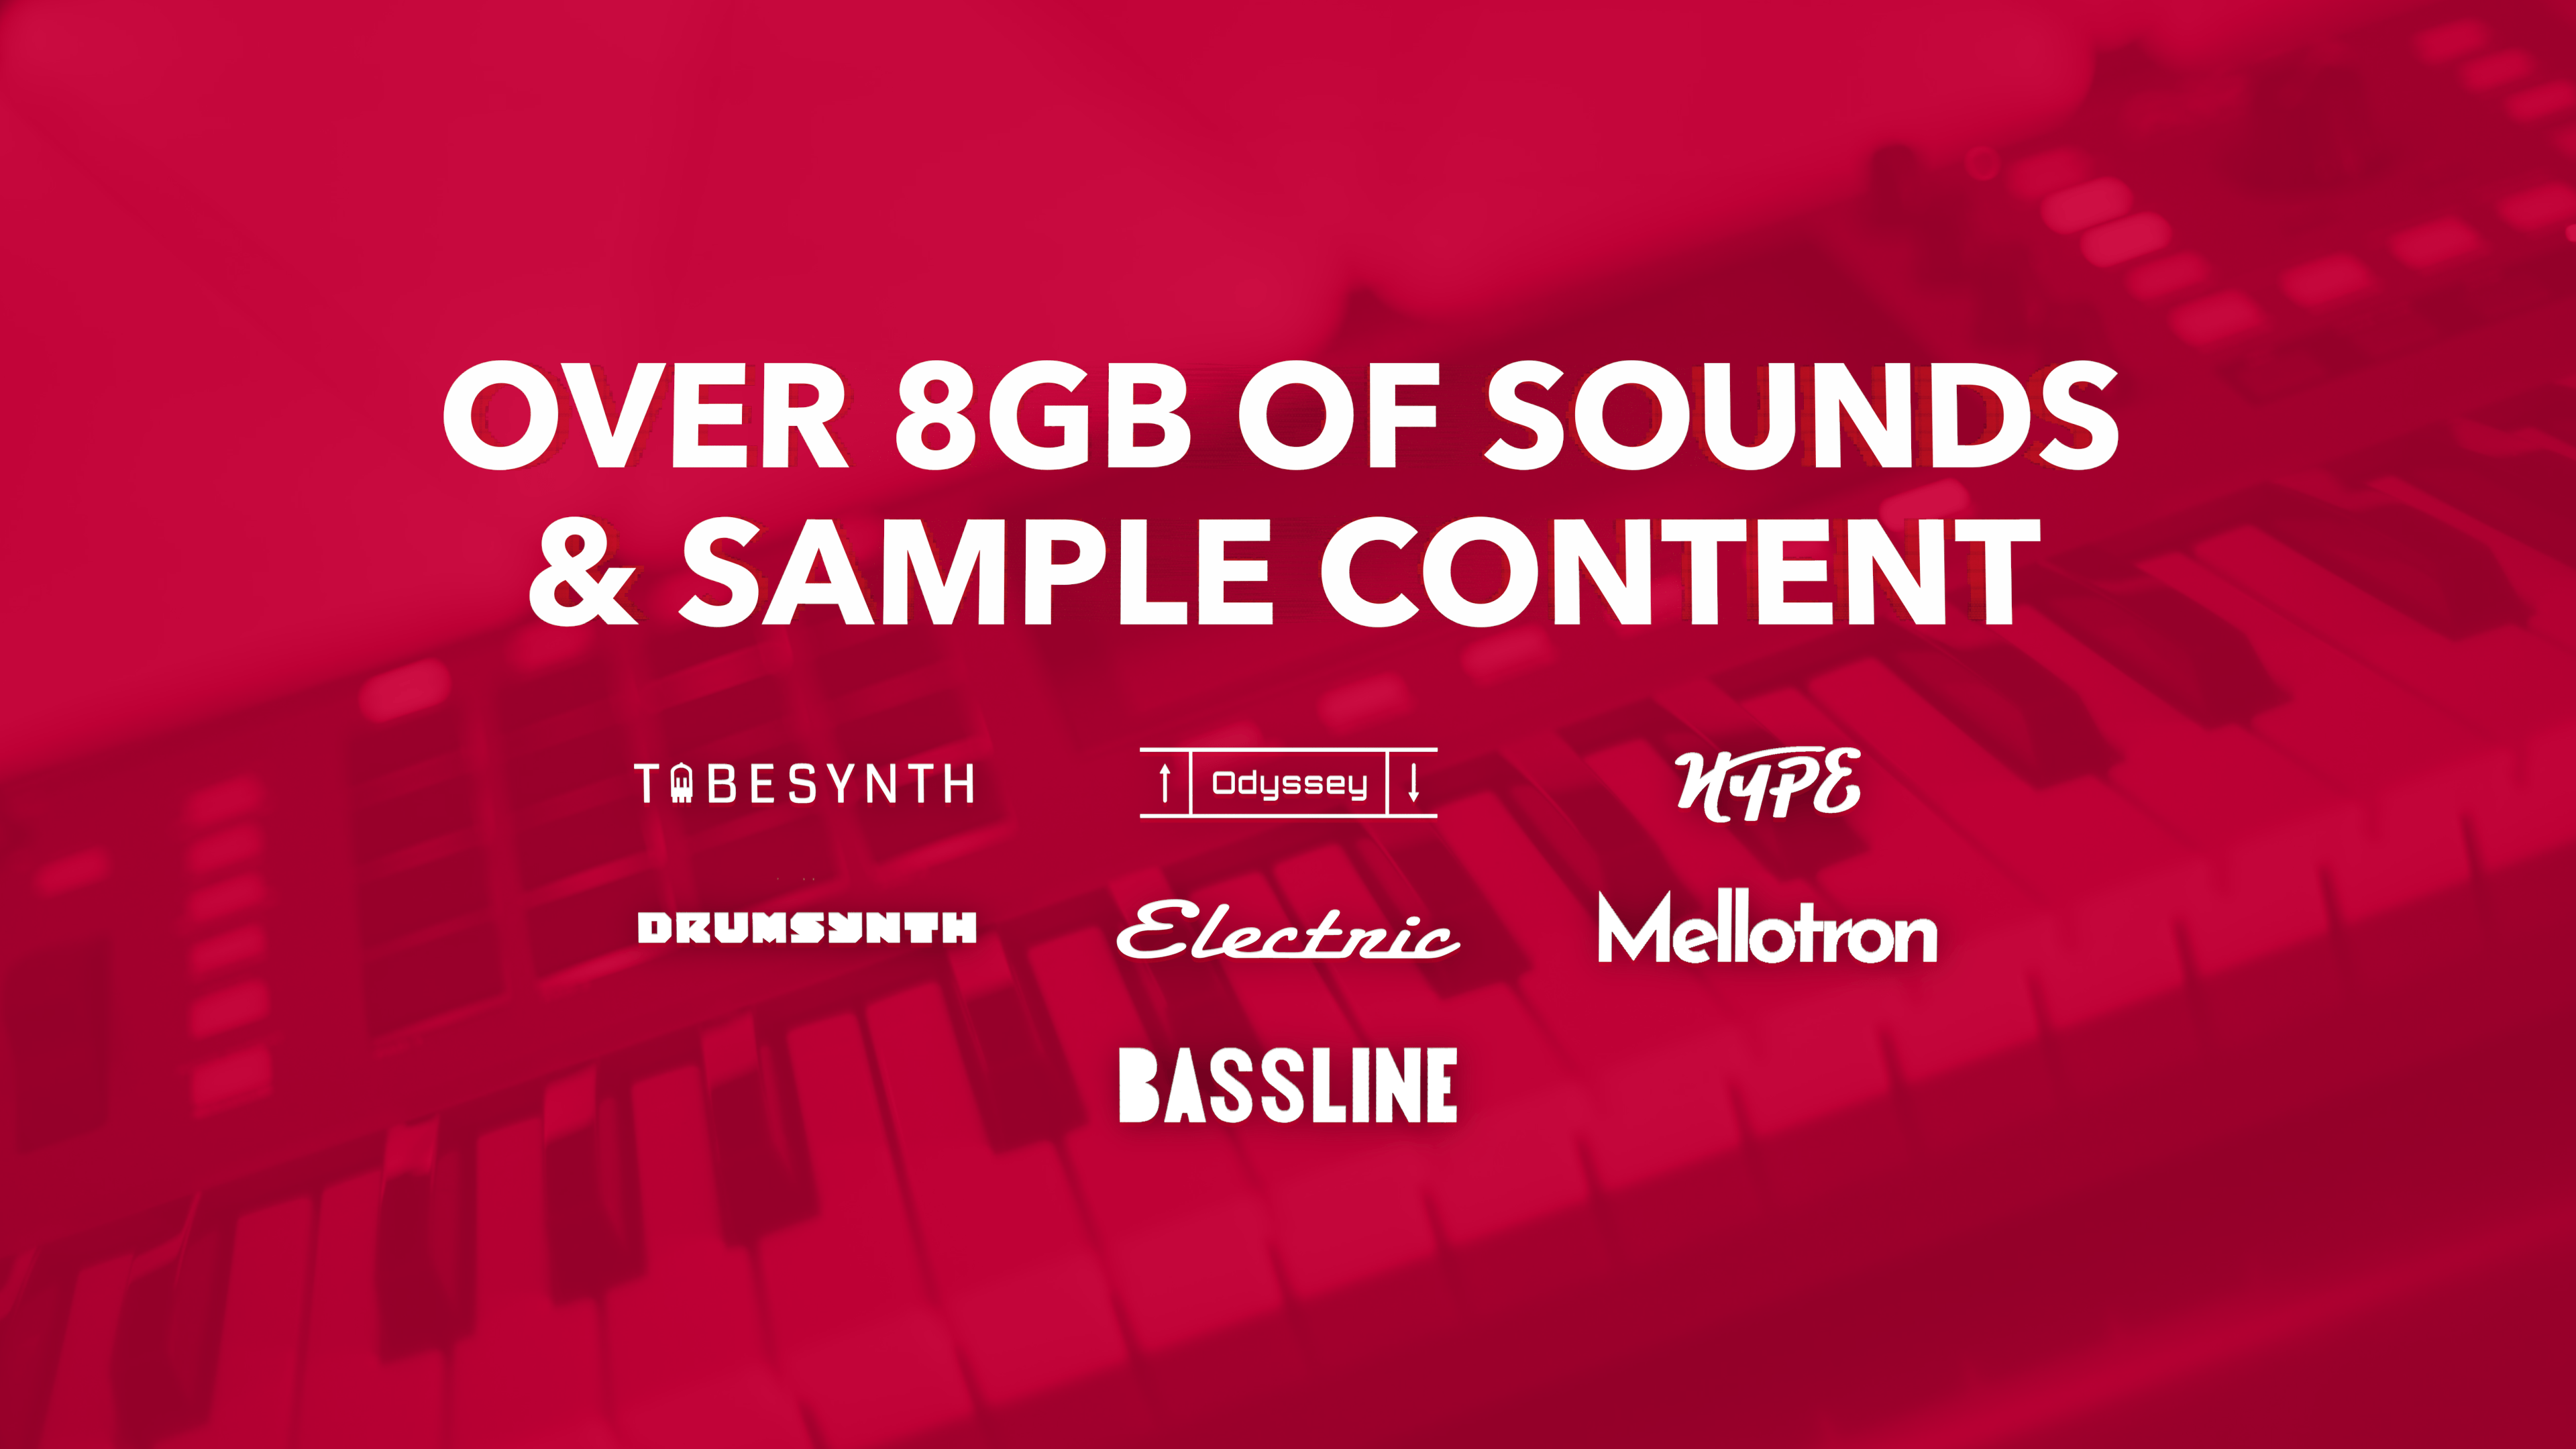 Over 8GB of Sounds & Sample Content